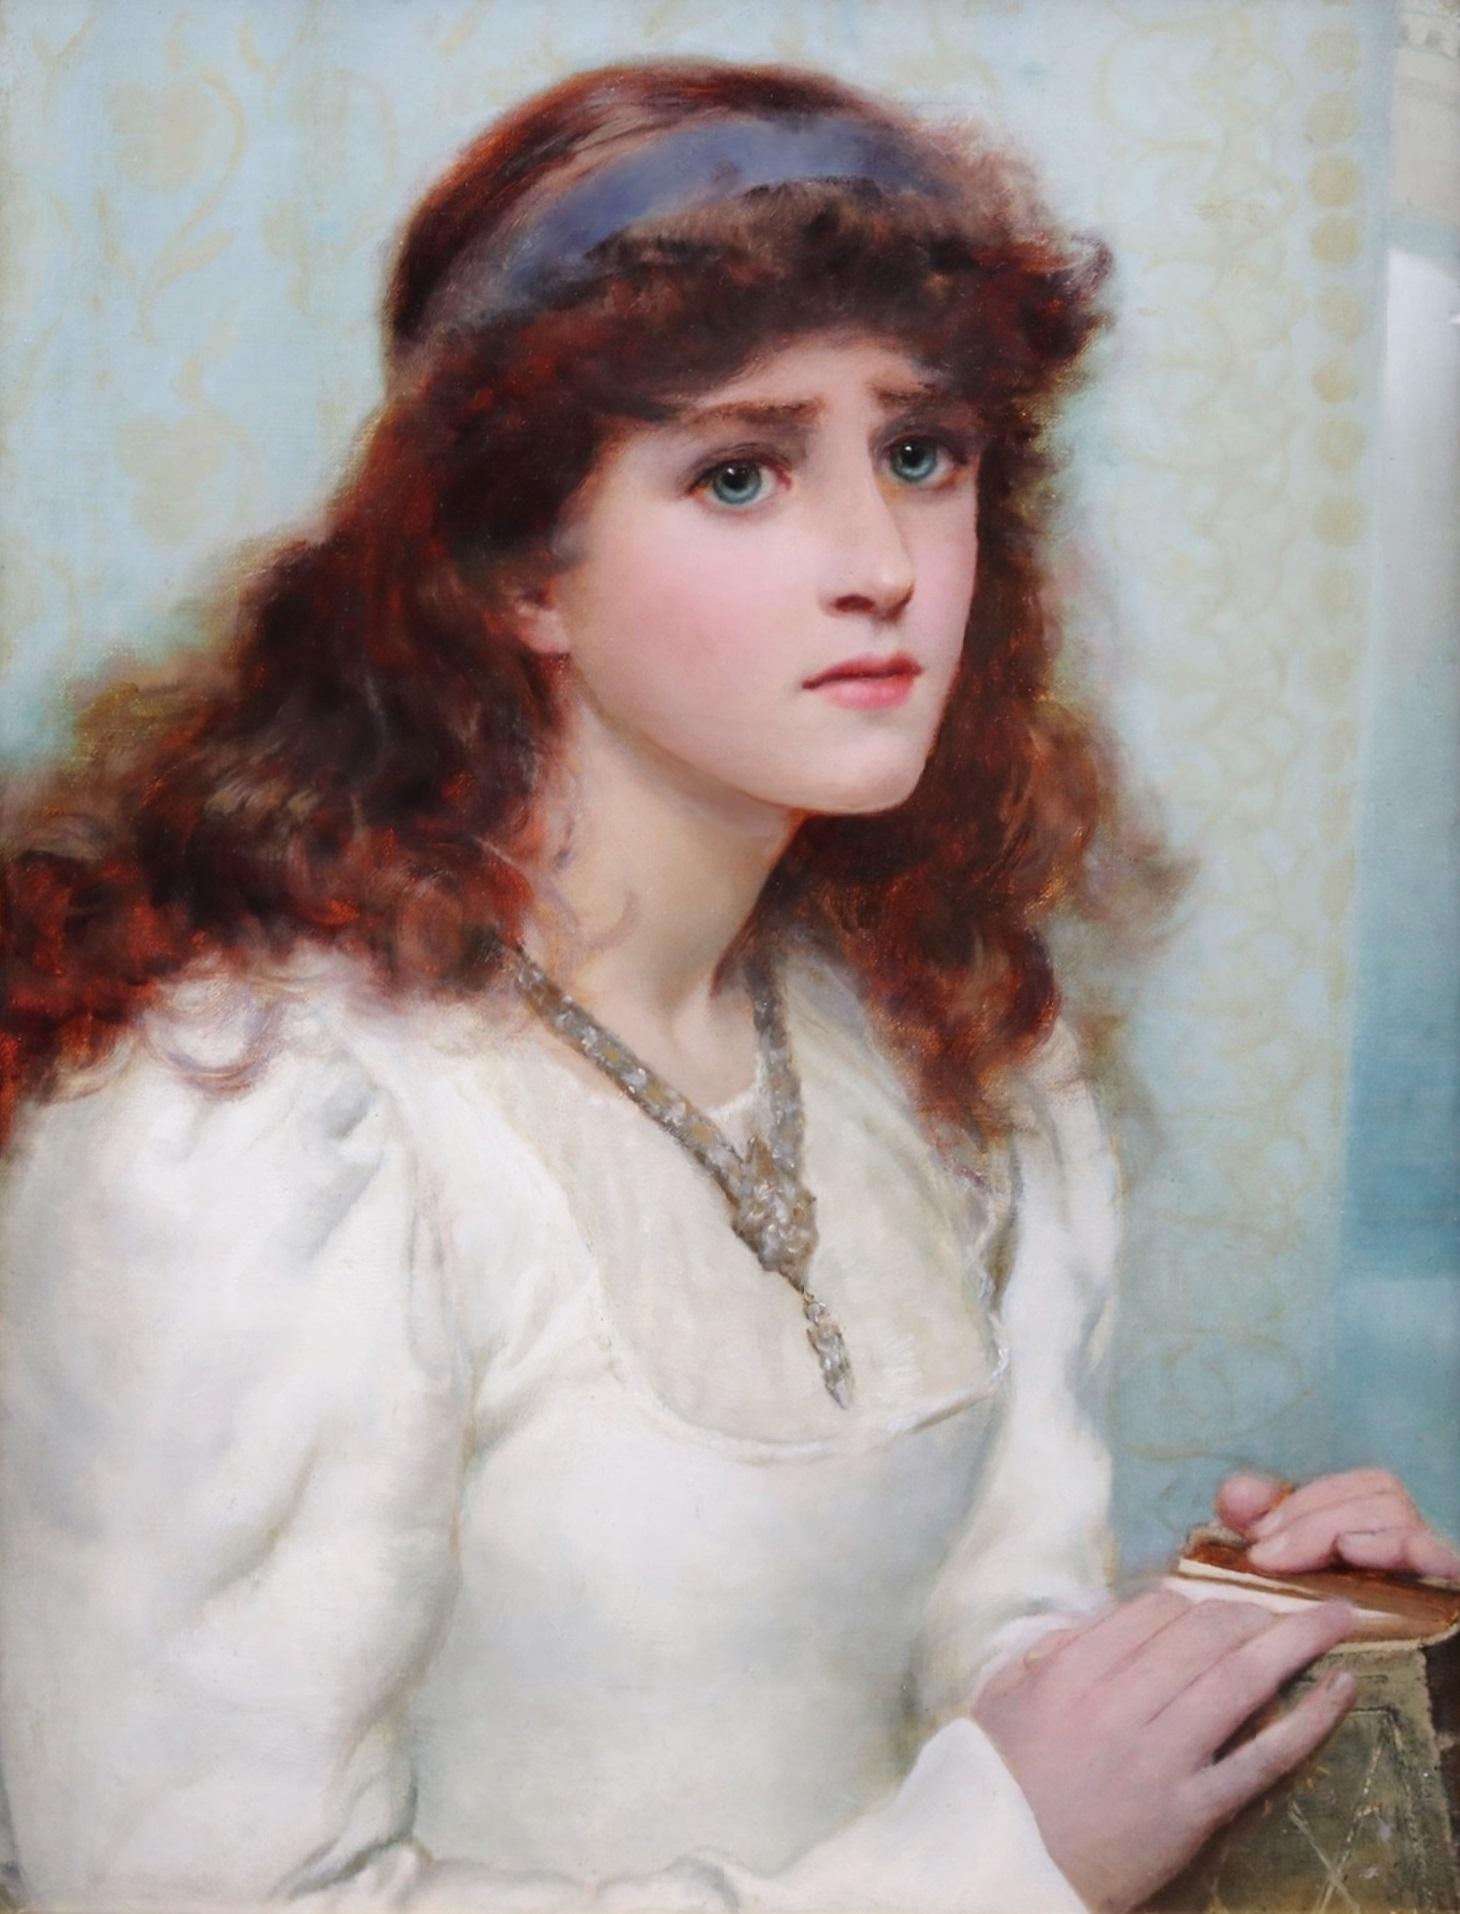 ‘Guinevere’ by Norman Prescott-Davies R.B.A, R.C.A. (1861-1915). The painting – which depicts an English mediaeval portrait of Queen Guinevere at Amesbury Priory contemplating her love for Launcelot – is signed by the artist and dated 1891. 

Norman